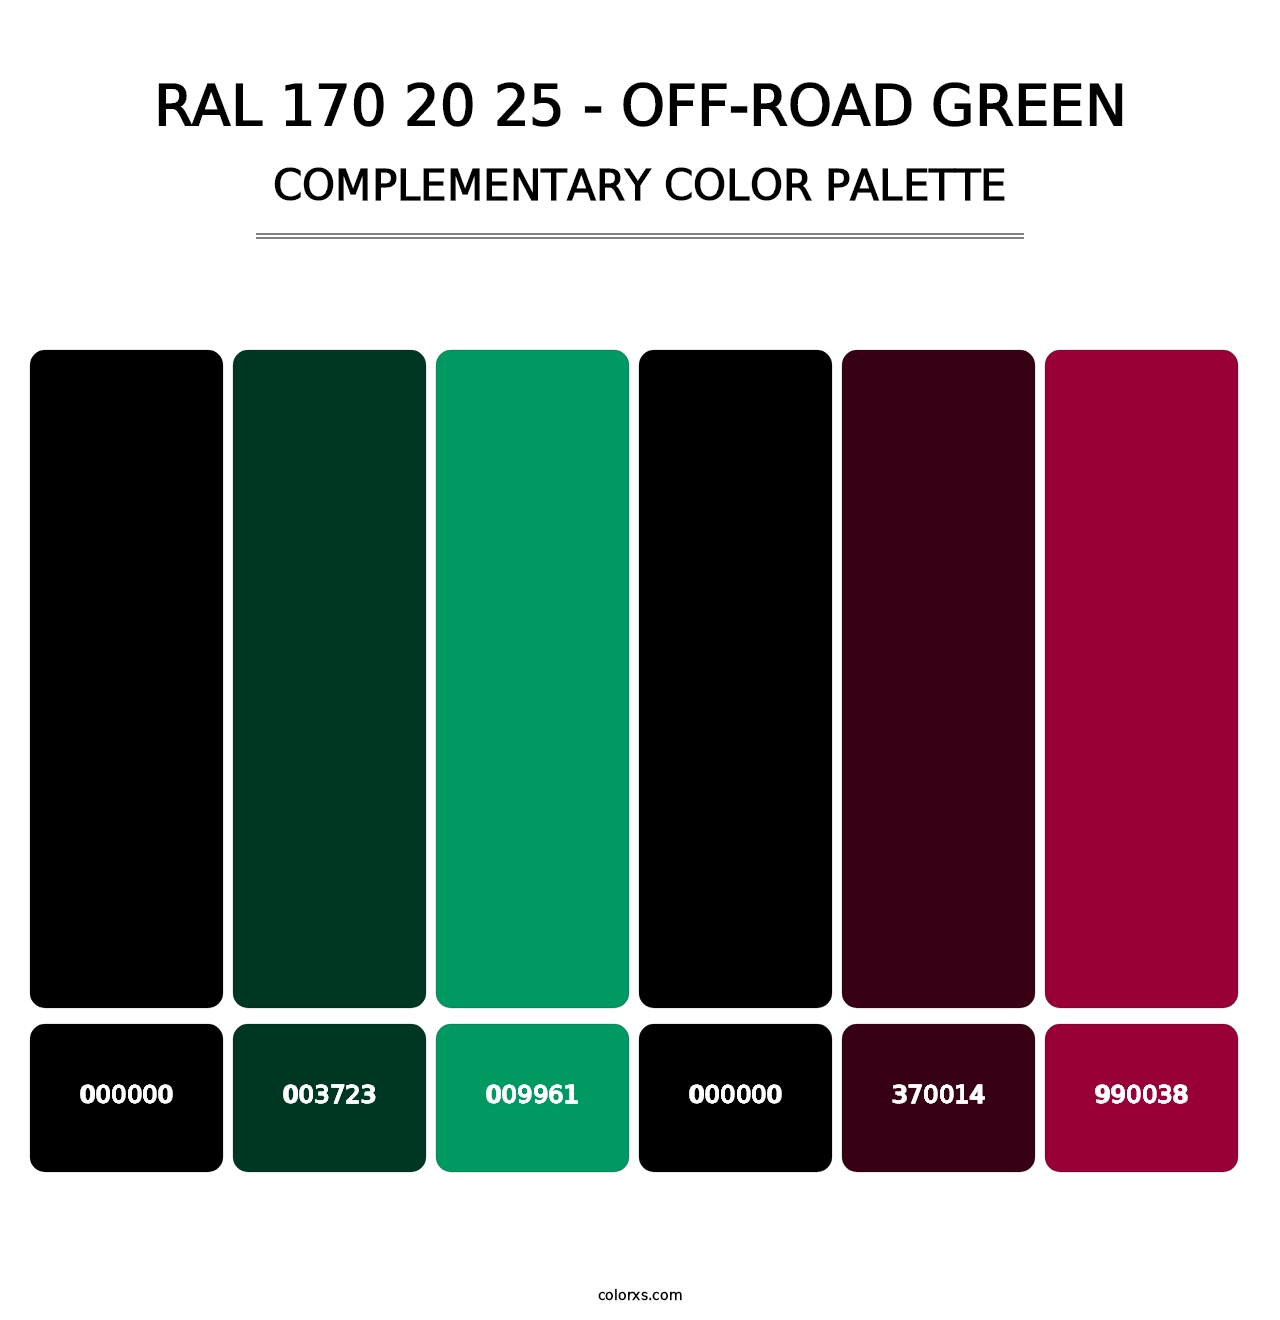 RAL 170 20 25 - Off-Road Green - Complementary Color Palette